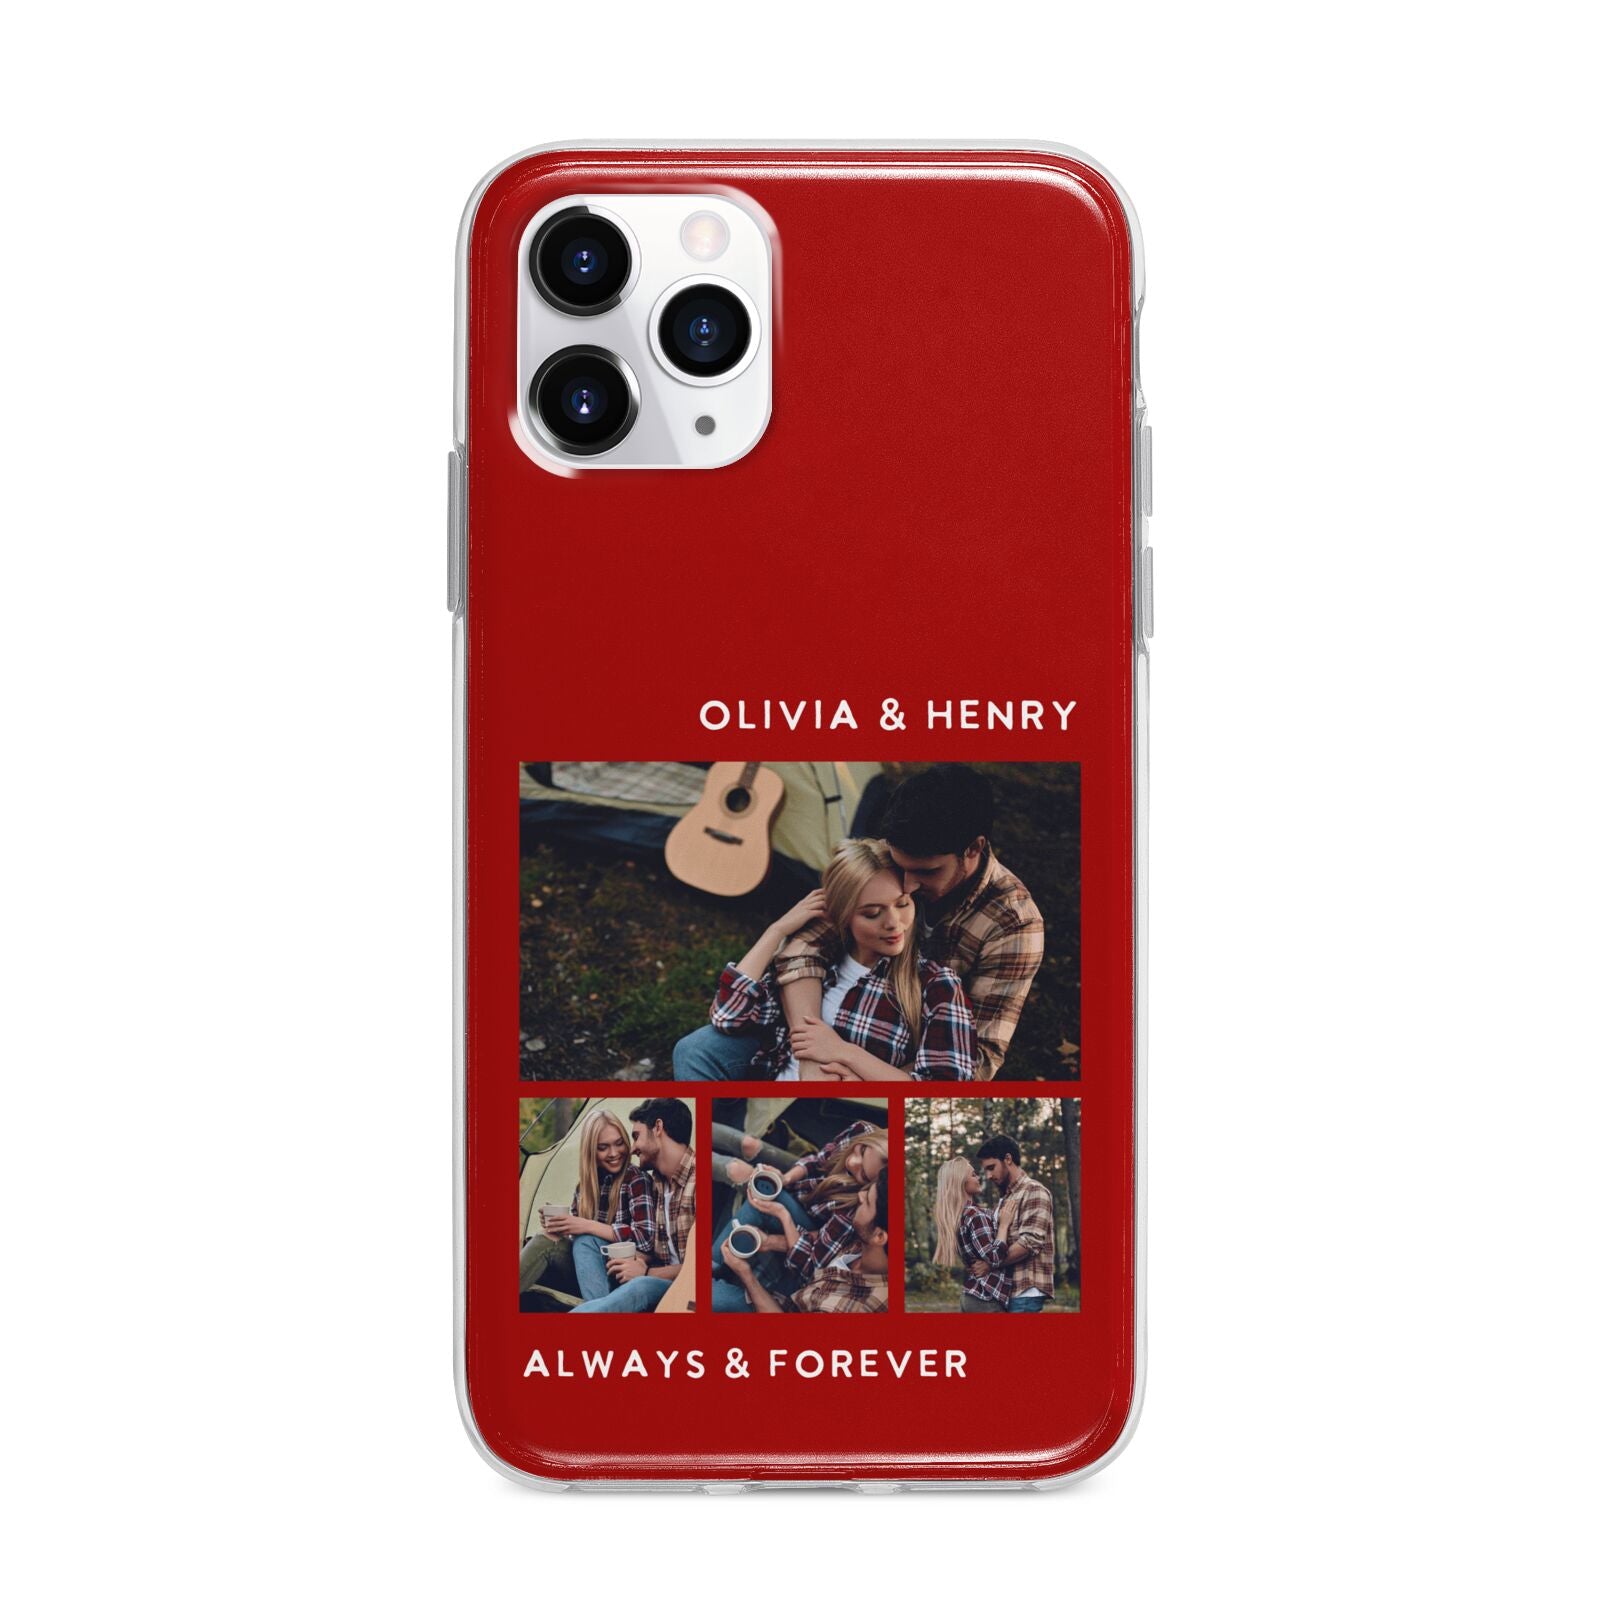 Couples Photo Collage Personalised Apple iPhone 11 Pro Max in Silver with Bumper Case